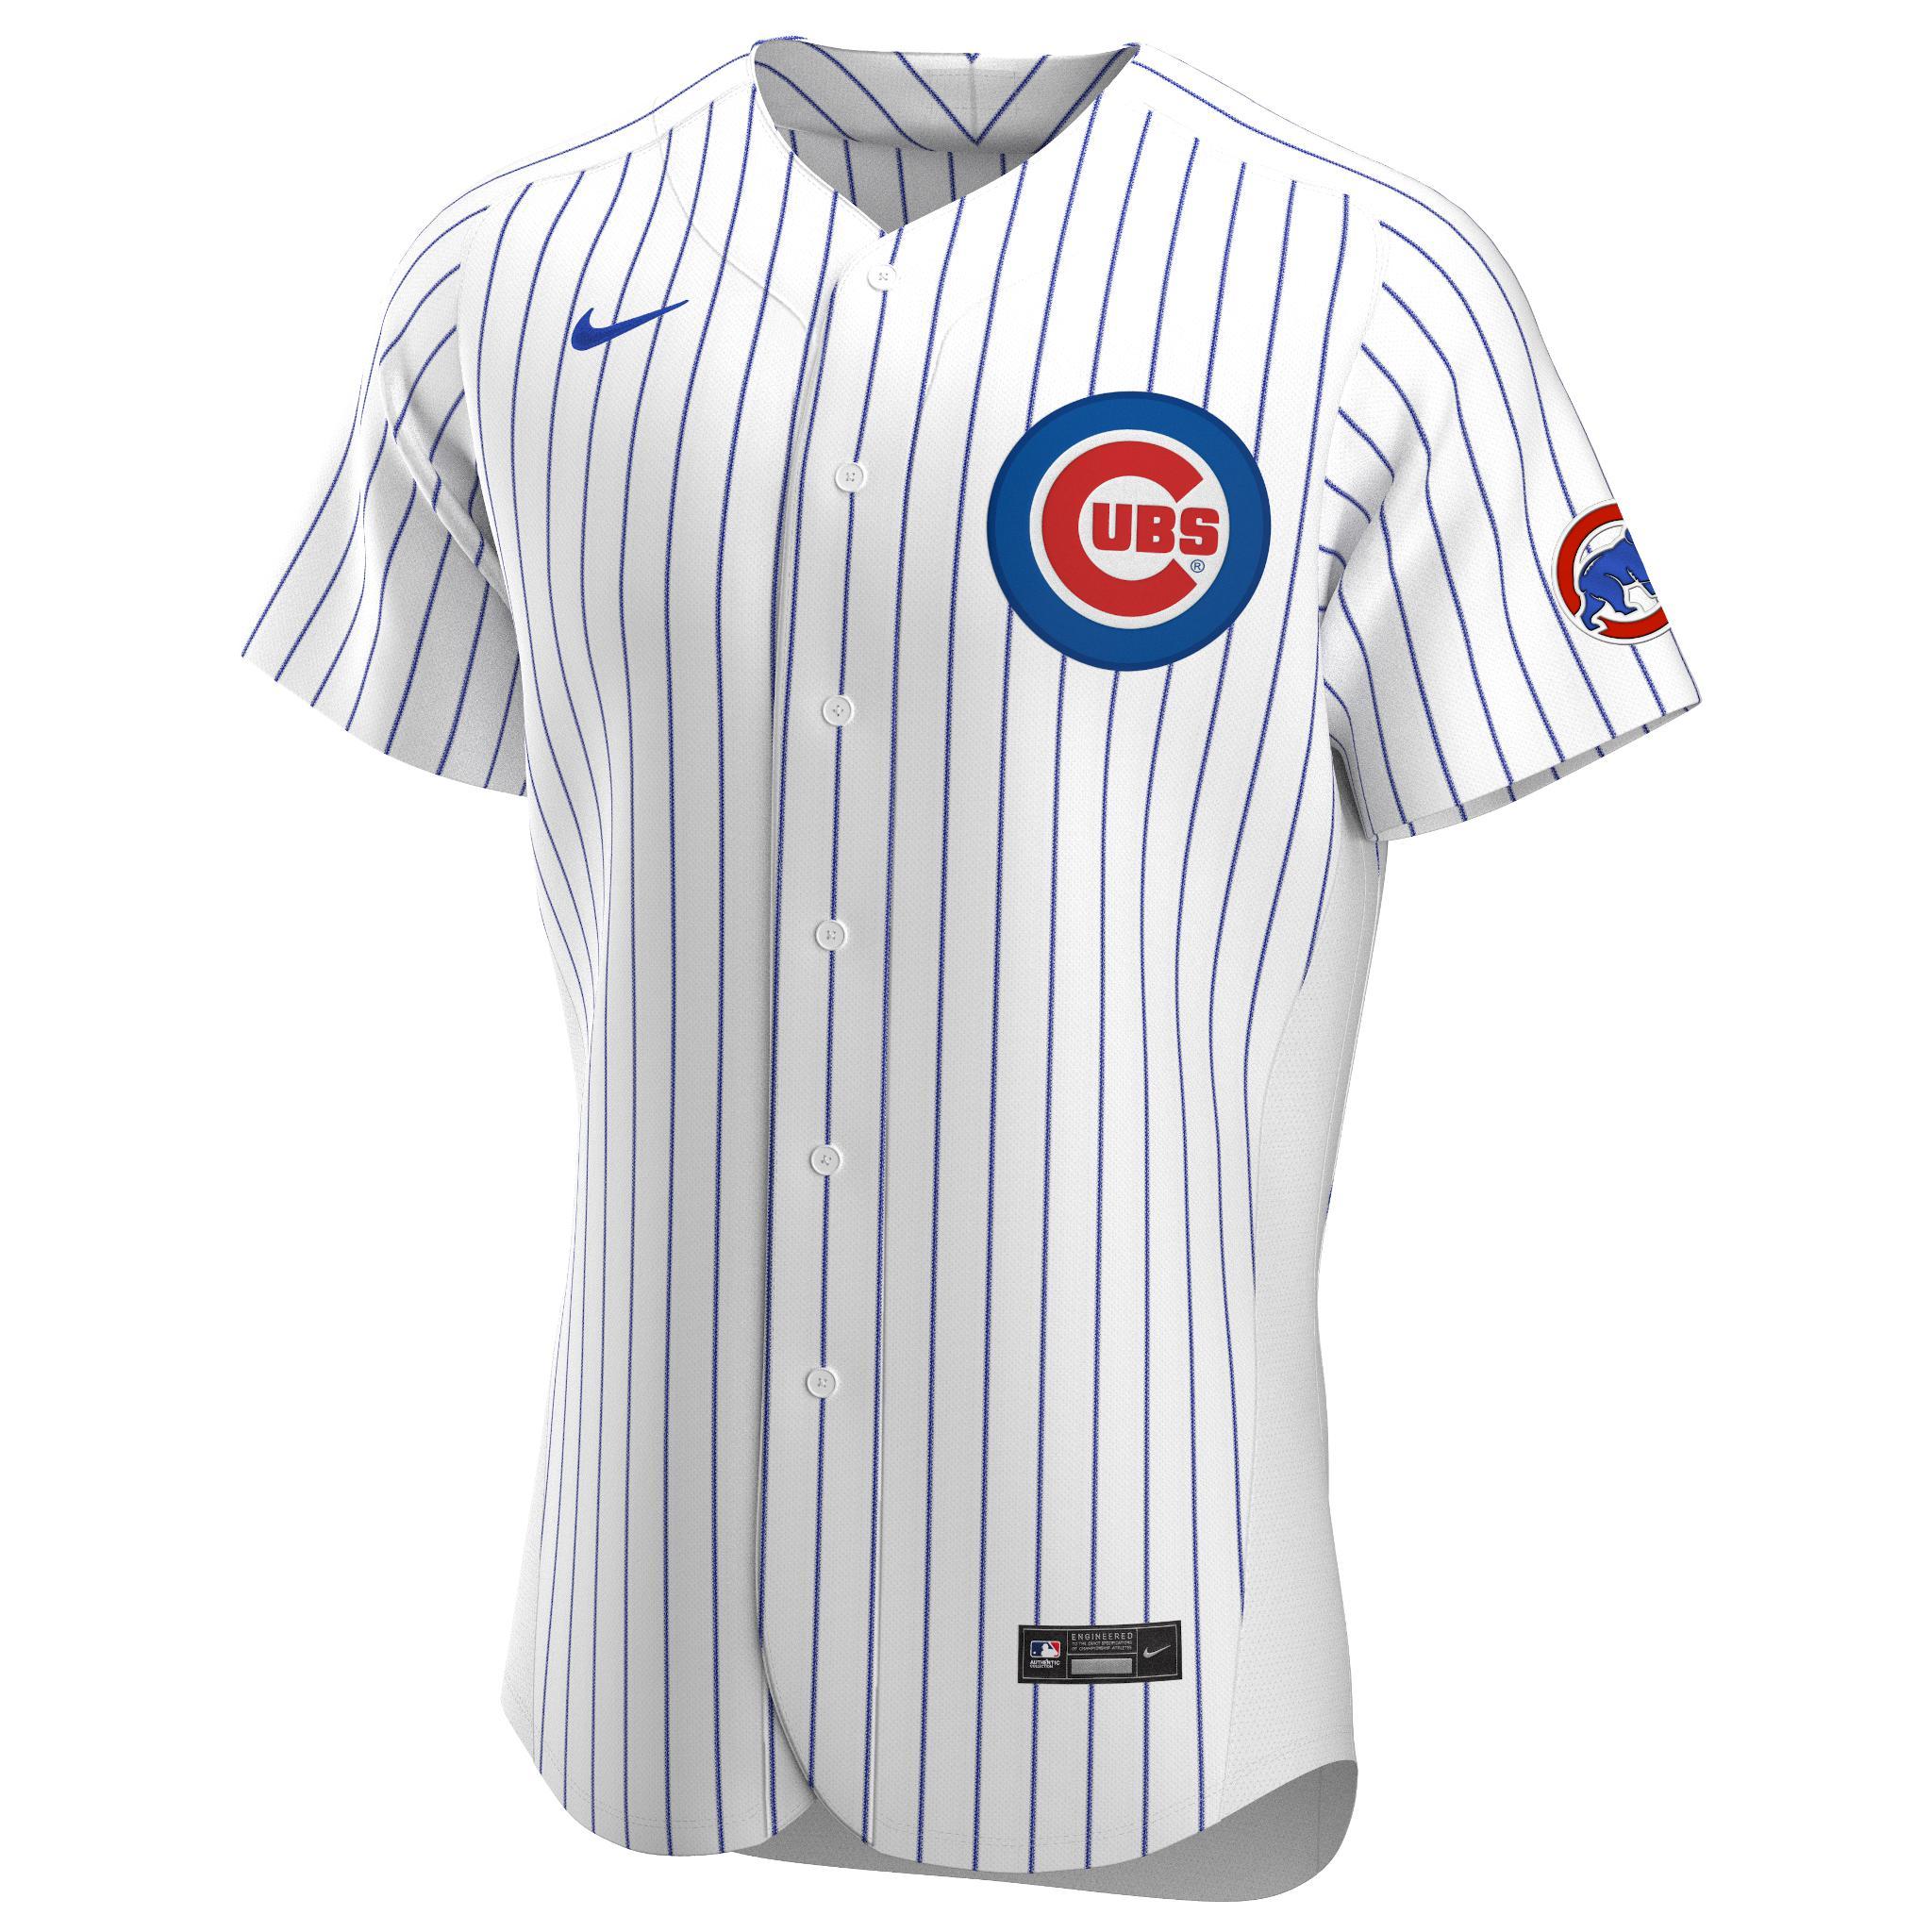 Class Of 2024 Chicago Cubs Jersey - Nouvette